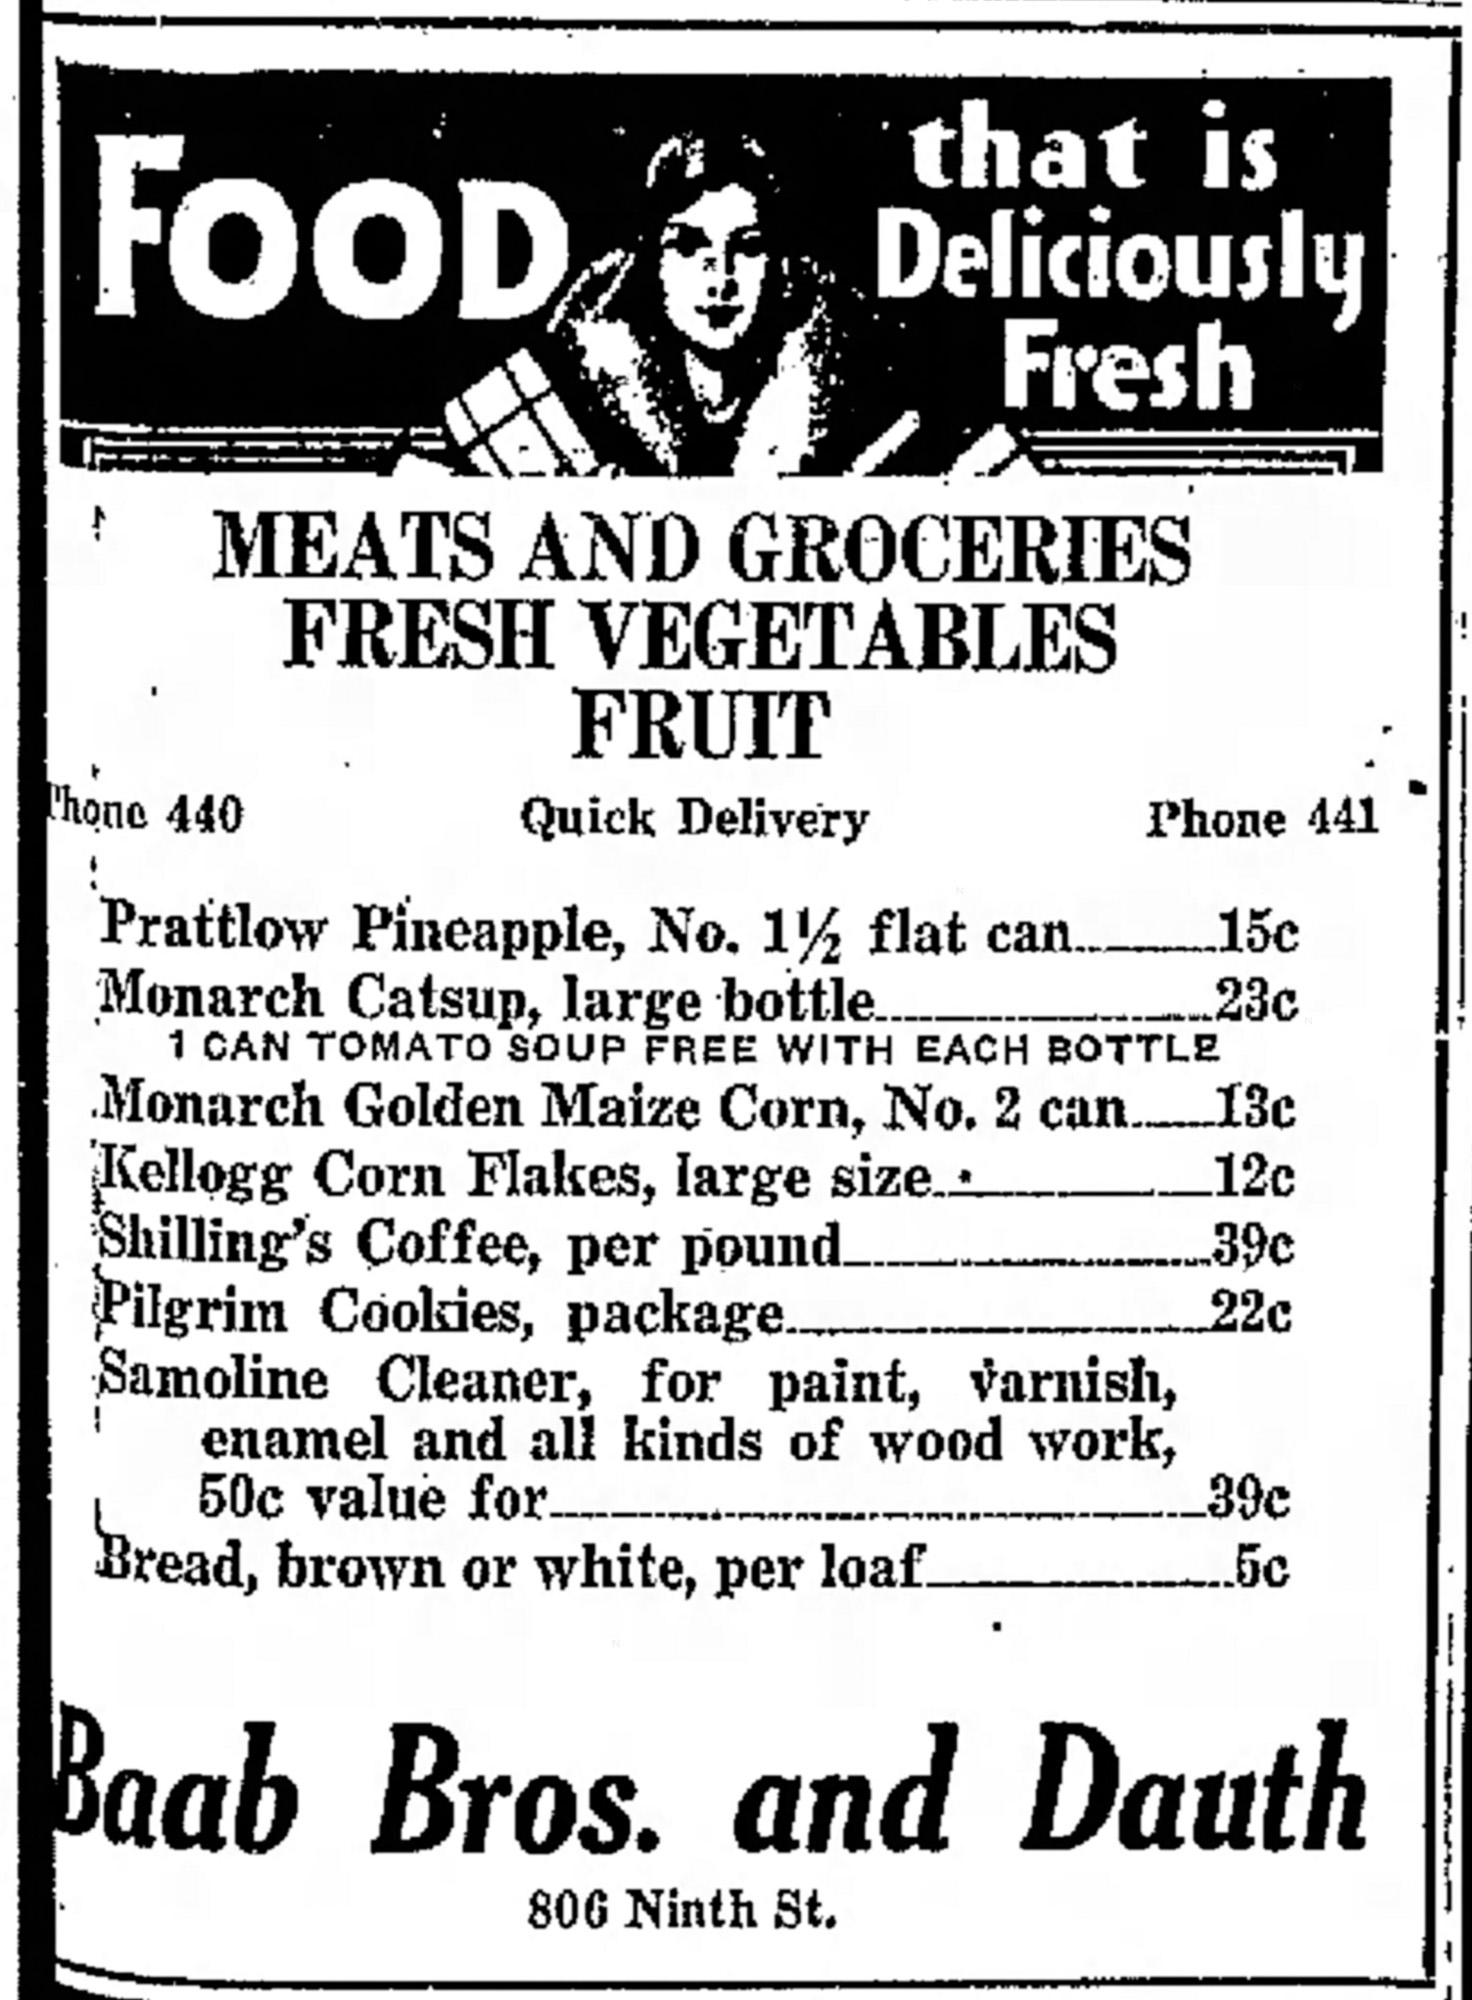 Dauth Family Archive - 1931-03-27 - Greeley Daily Tribune - Baab Bros and Dauth Advertisement